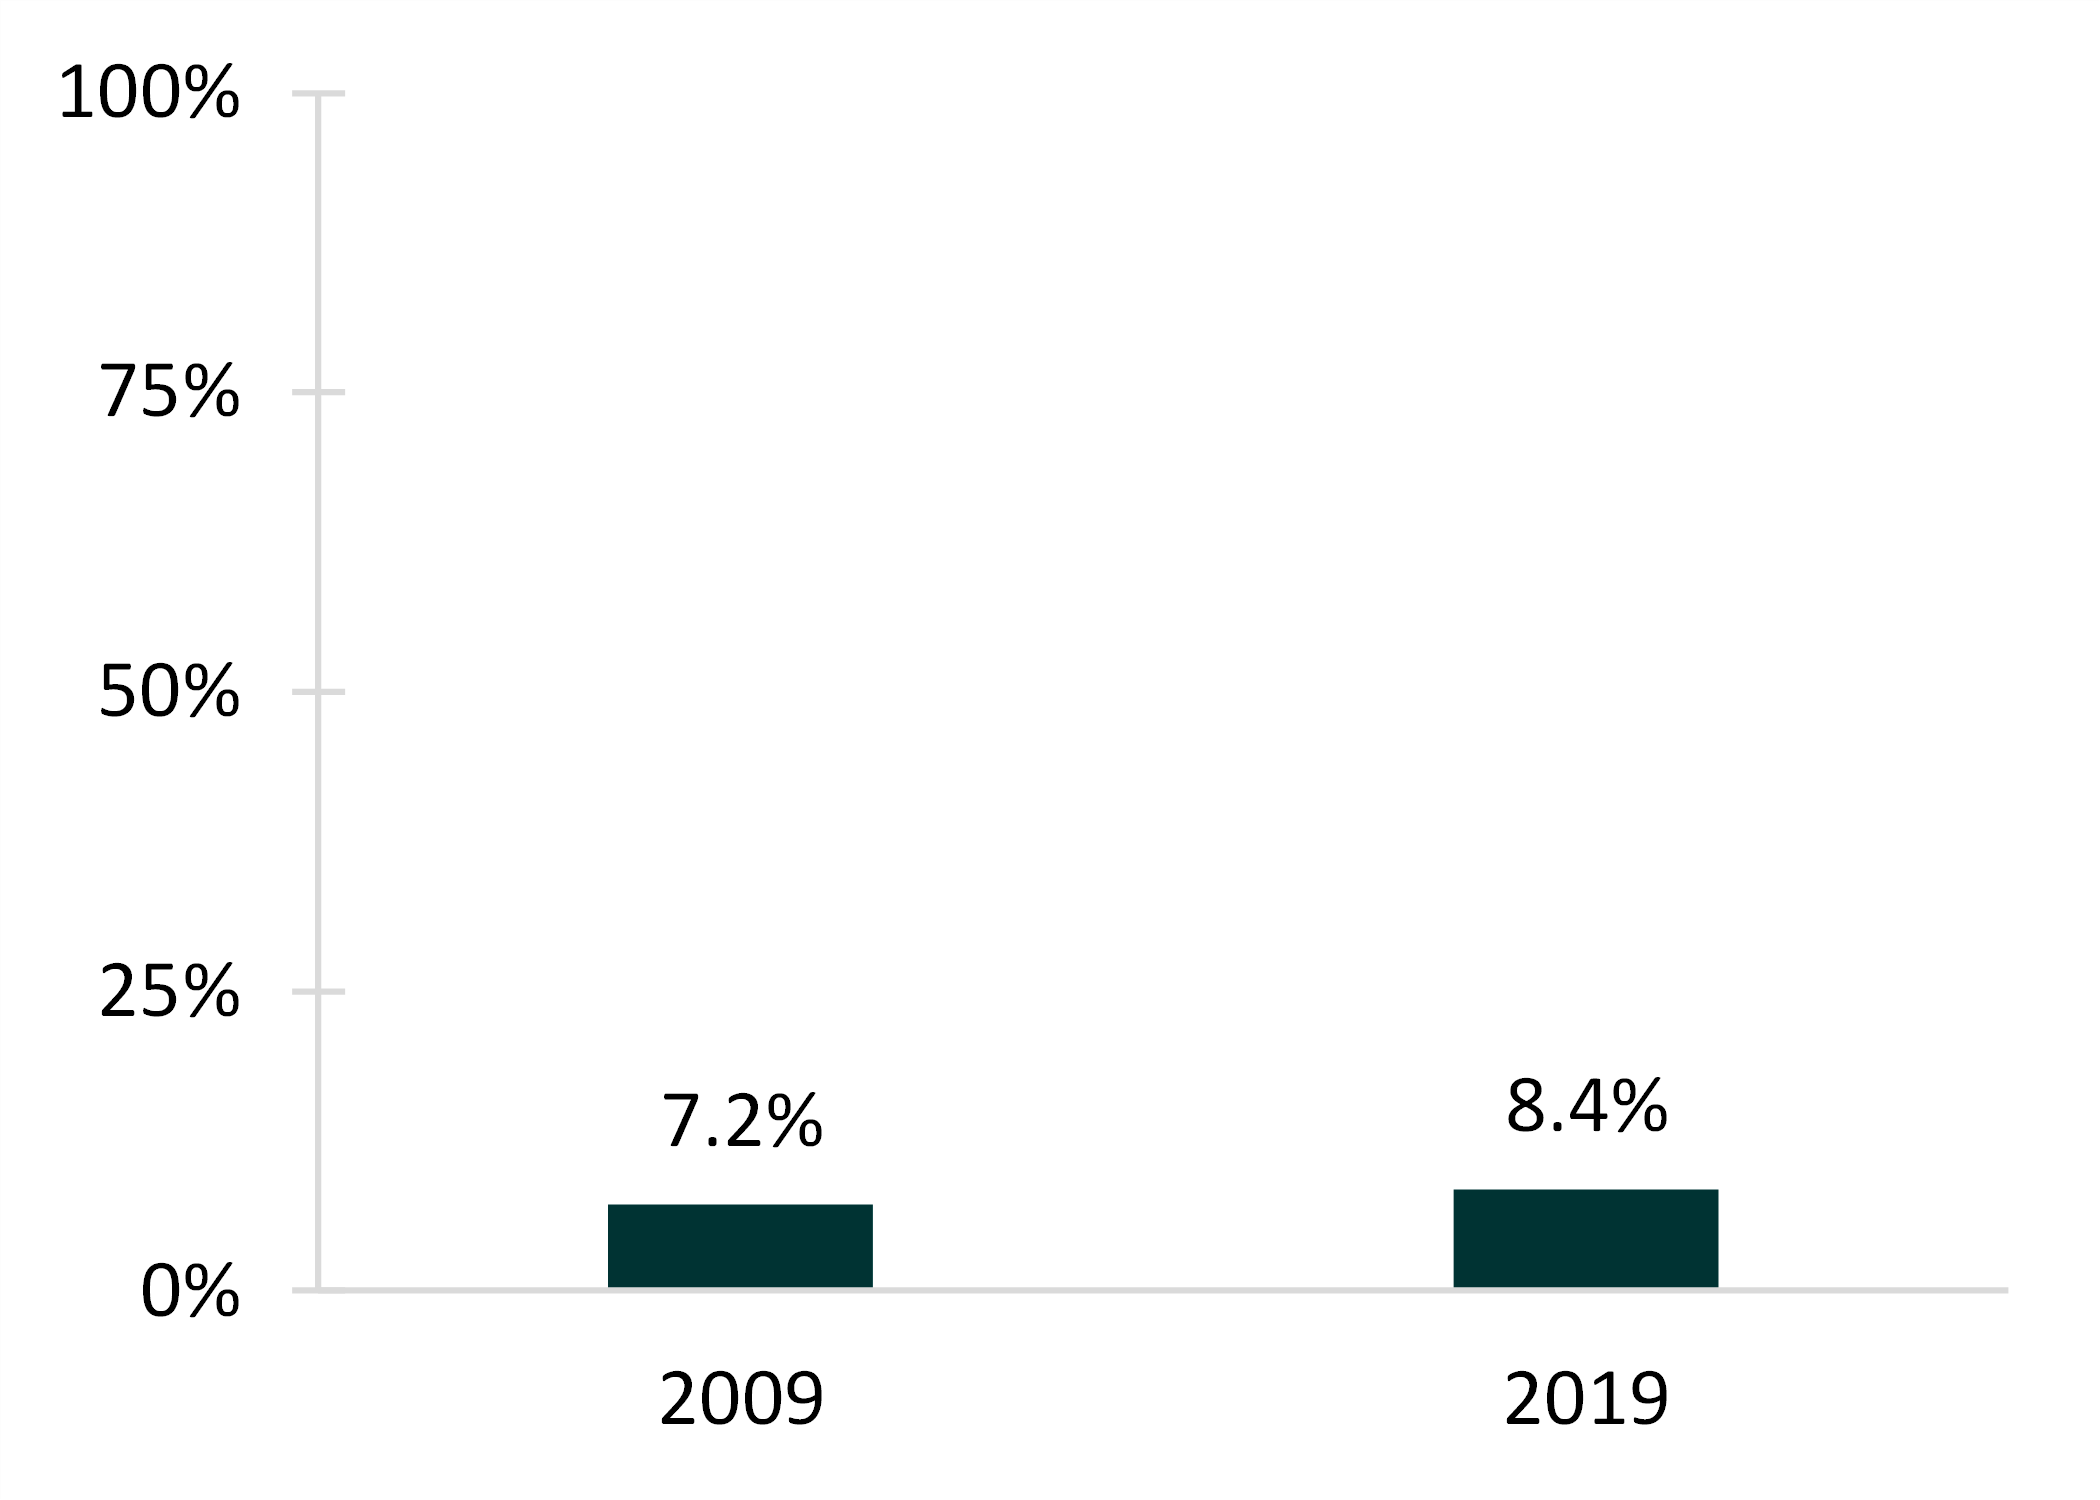 teal bar chart showing Figure 1. Percentage of Children Living in Grandparent-Headed households, 2009 and 2019